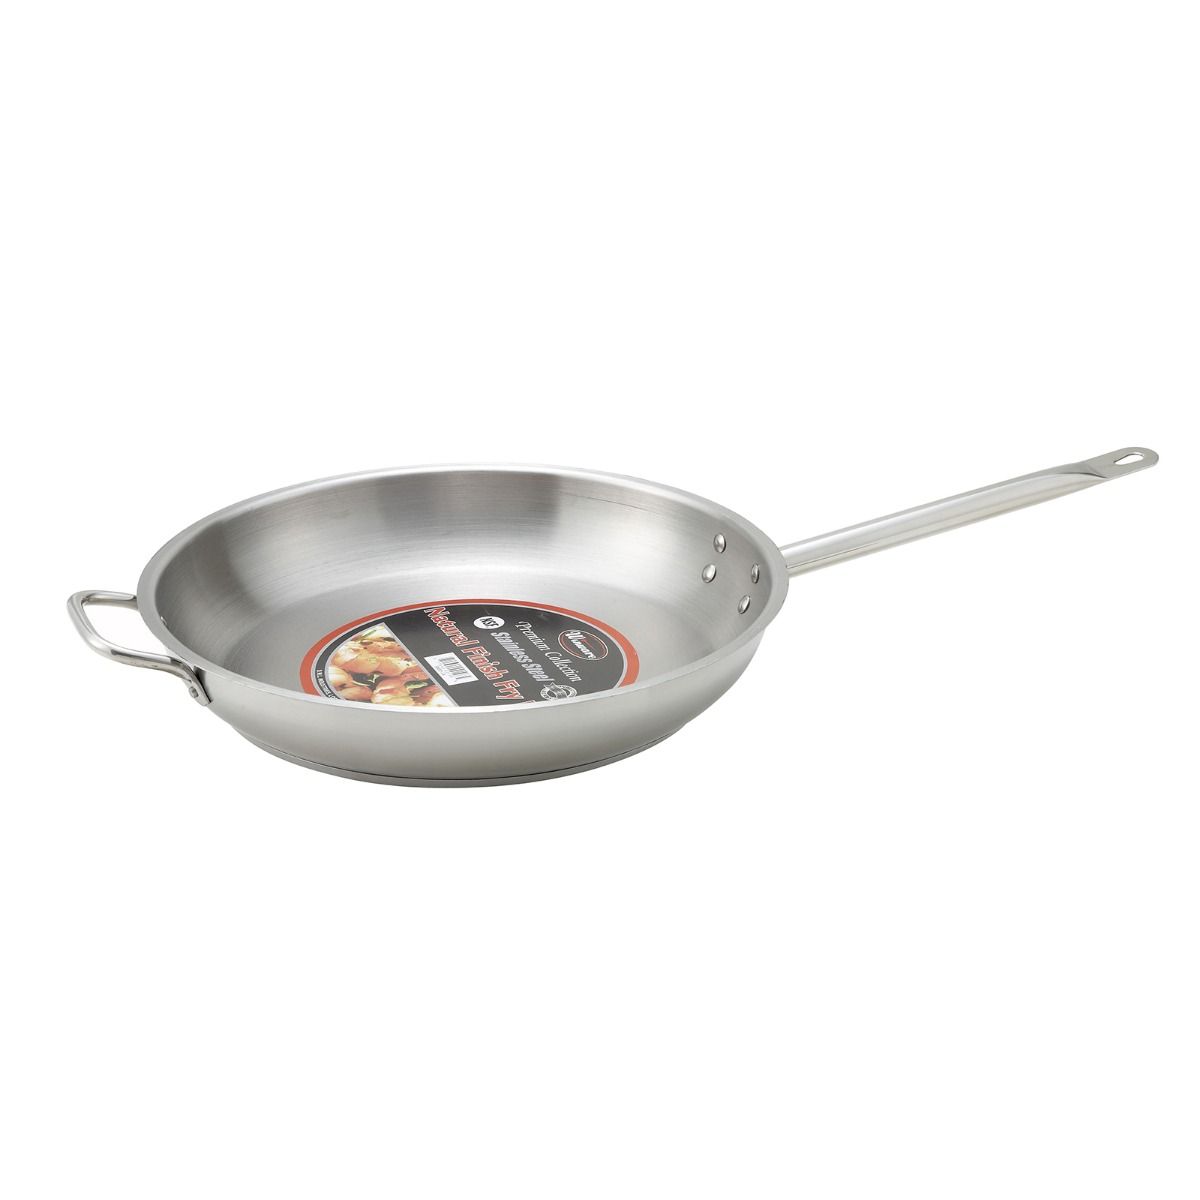 Winco - SSFP-14 - 14 in Stainless Steel Fry Pan